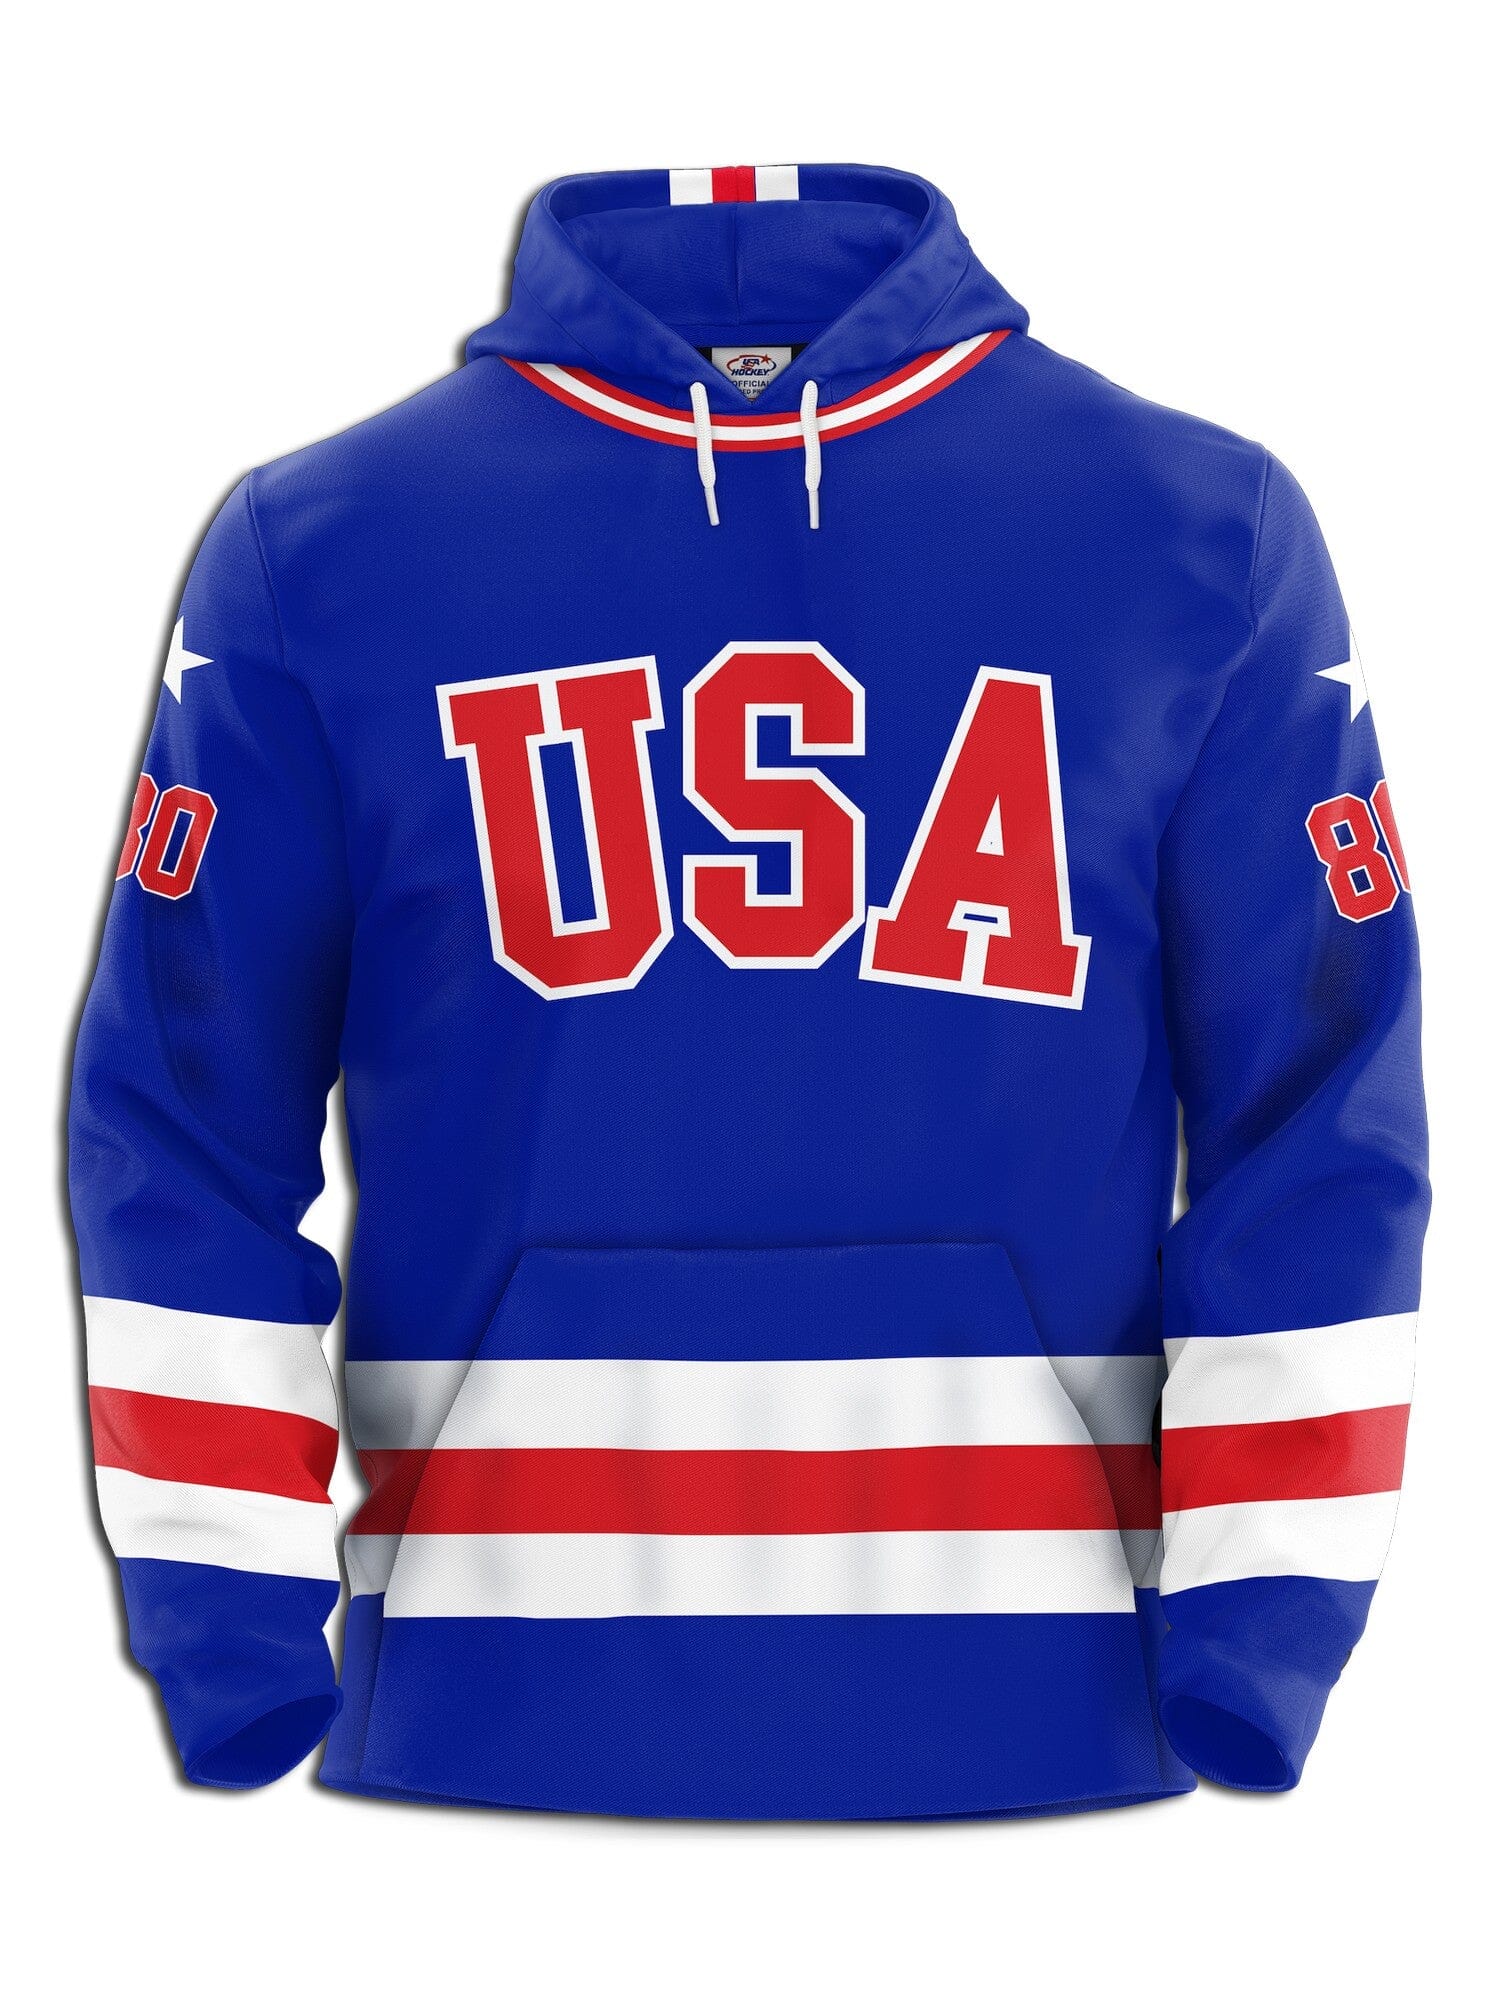 USA Miracle on Ice 1980 Hockey Hoodie Hockey Hoodie BenchClearers YOUTH S Royal Blue Polyester